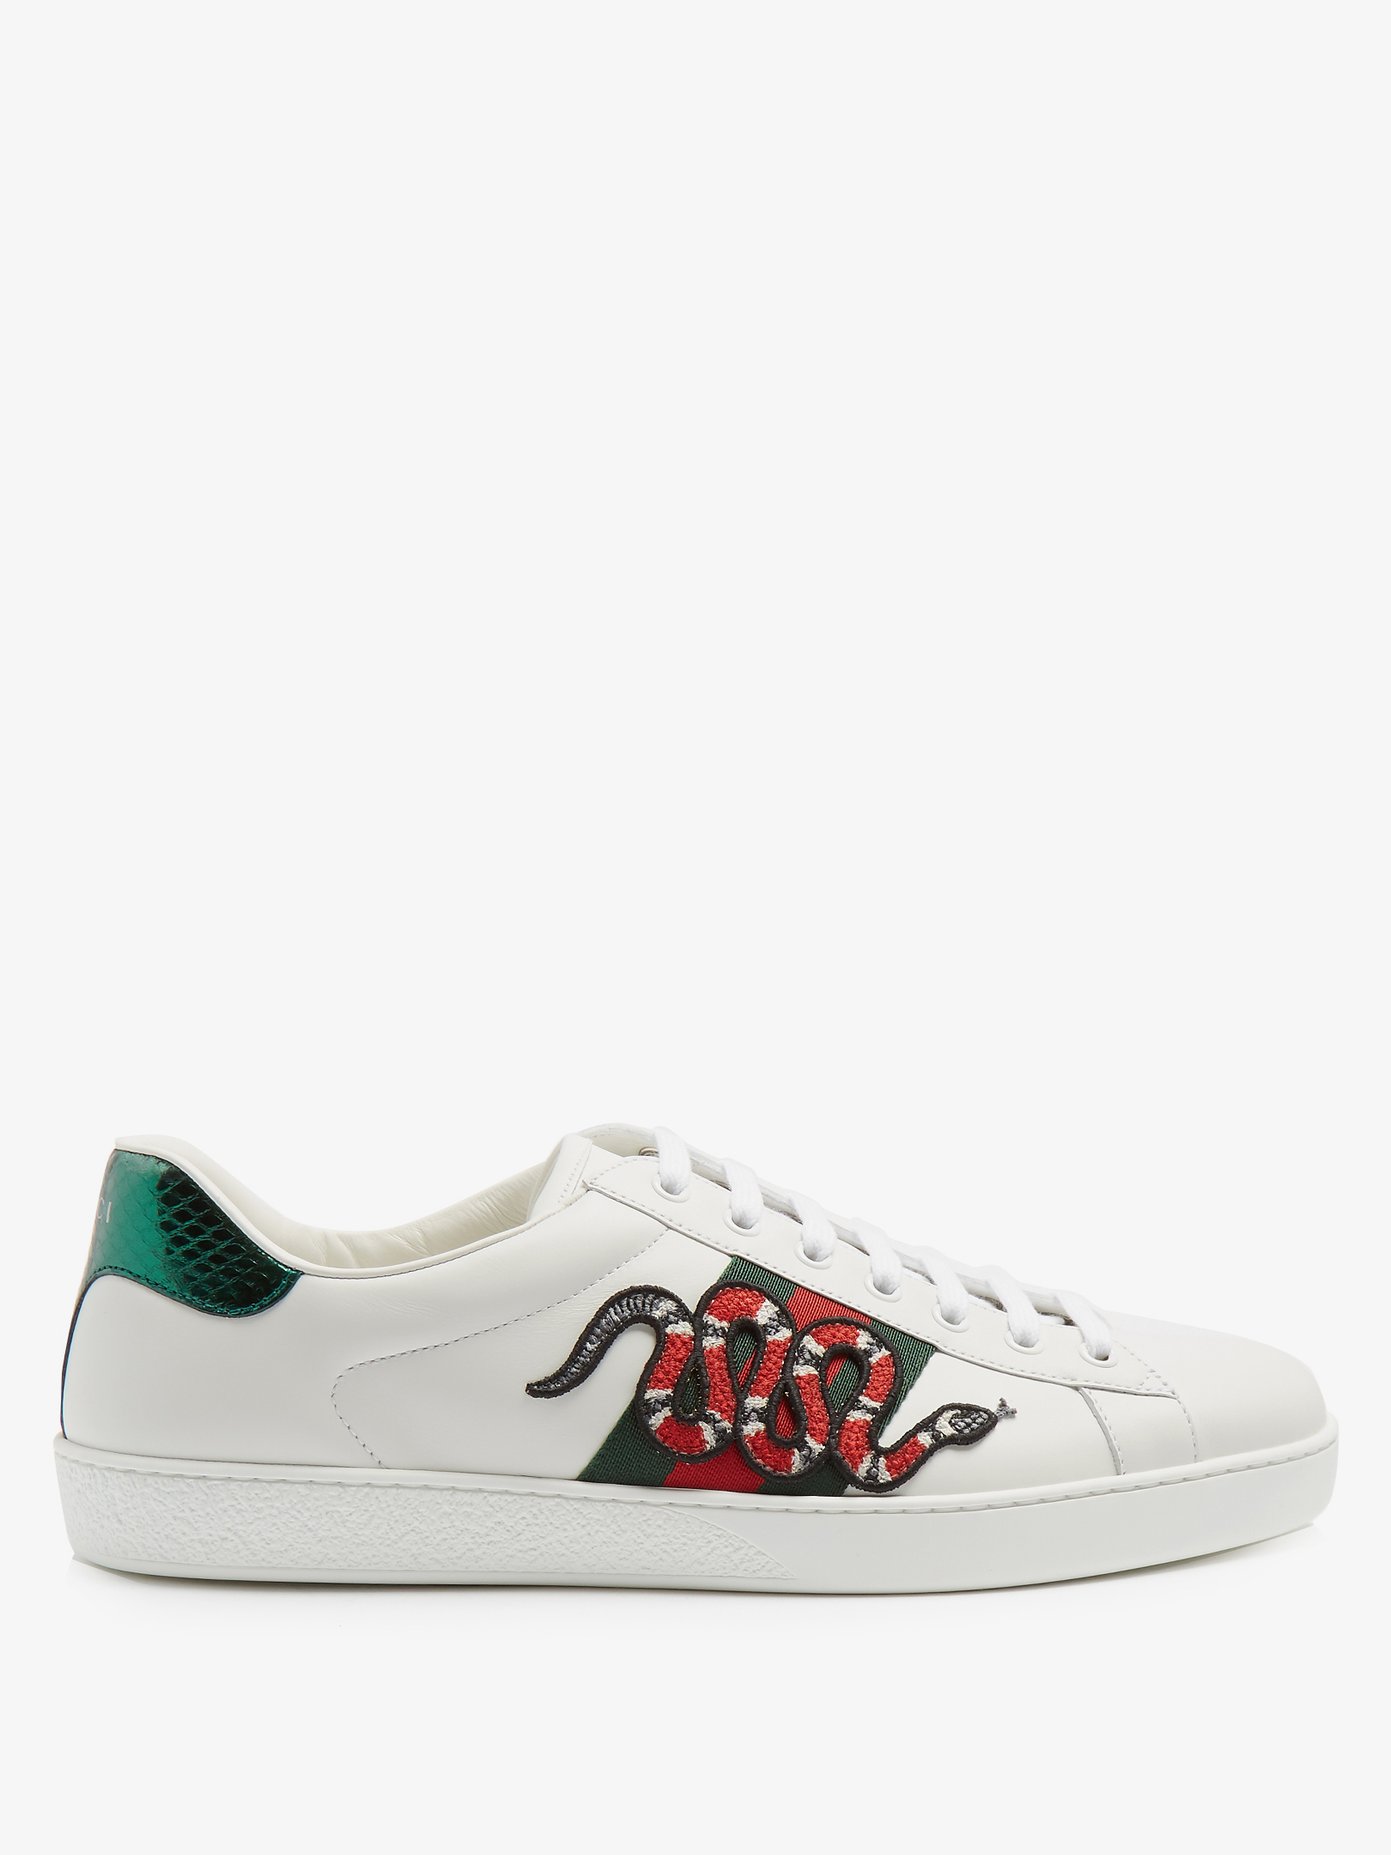 gucci ace trainers